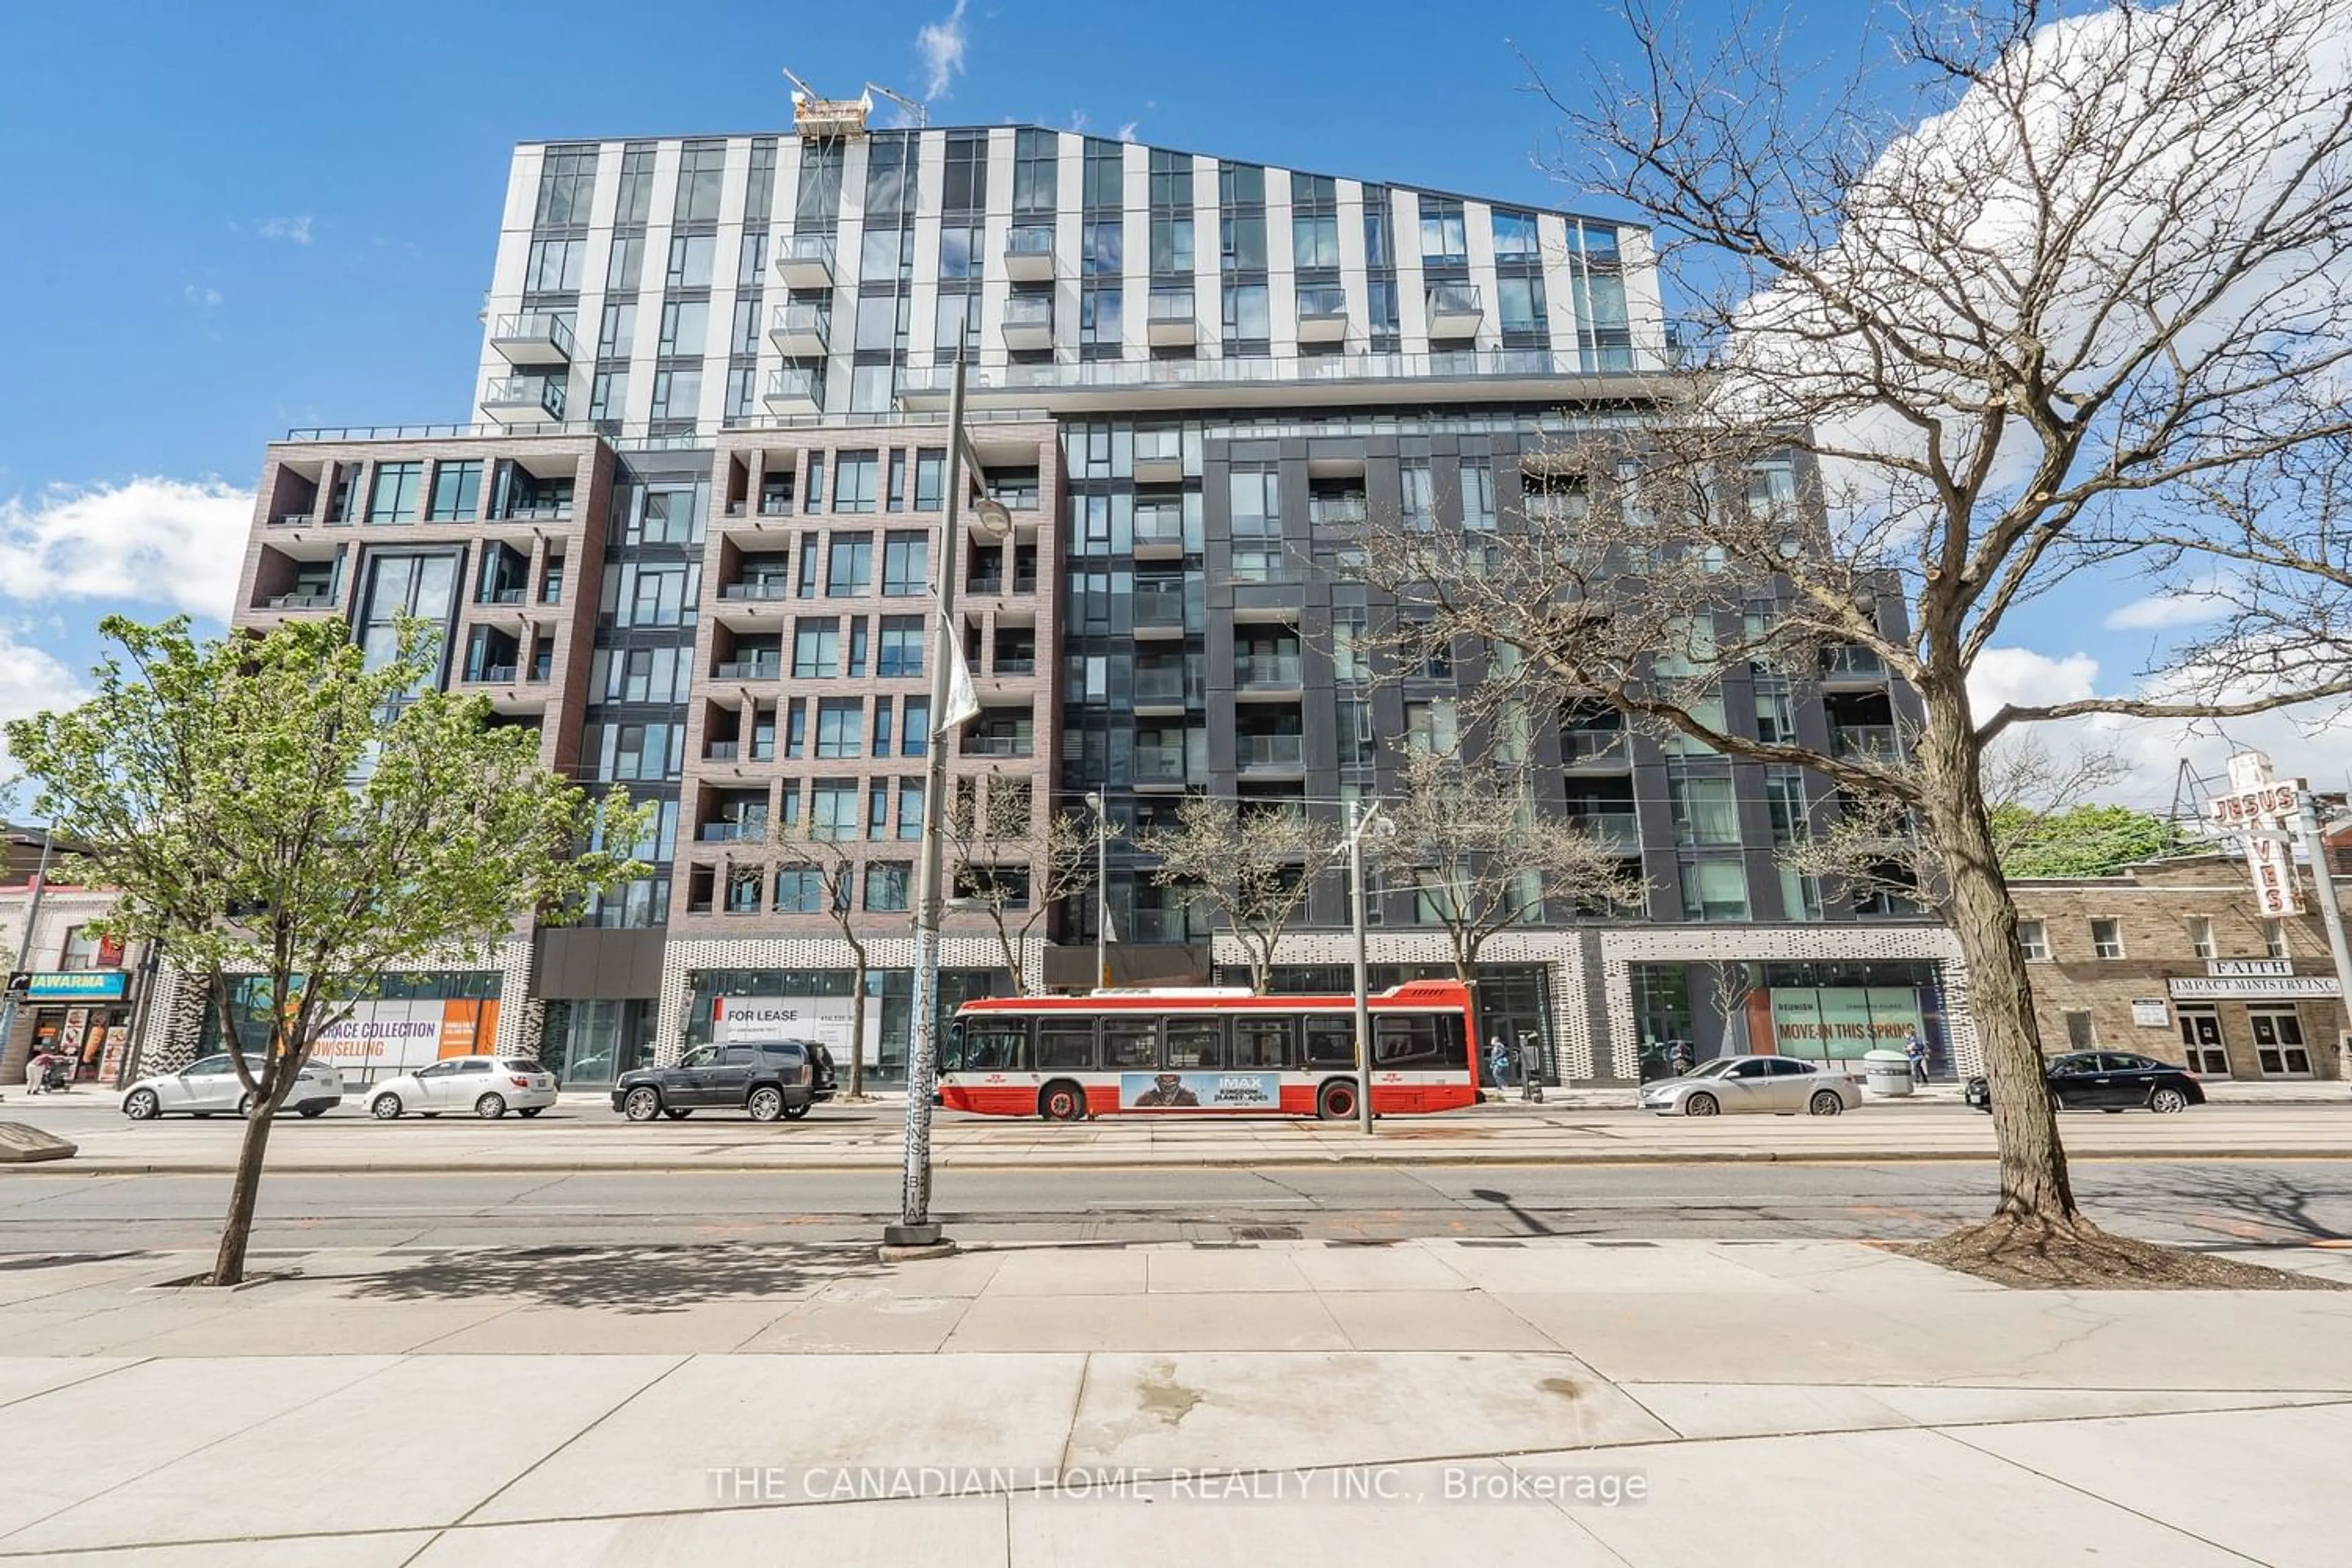 A pic from exterior of the house or condo for 1808 St. Clair Ave #604, Toronto Ontario M6N 0C1